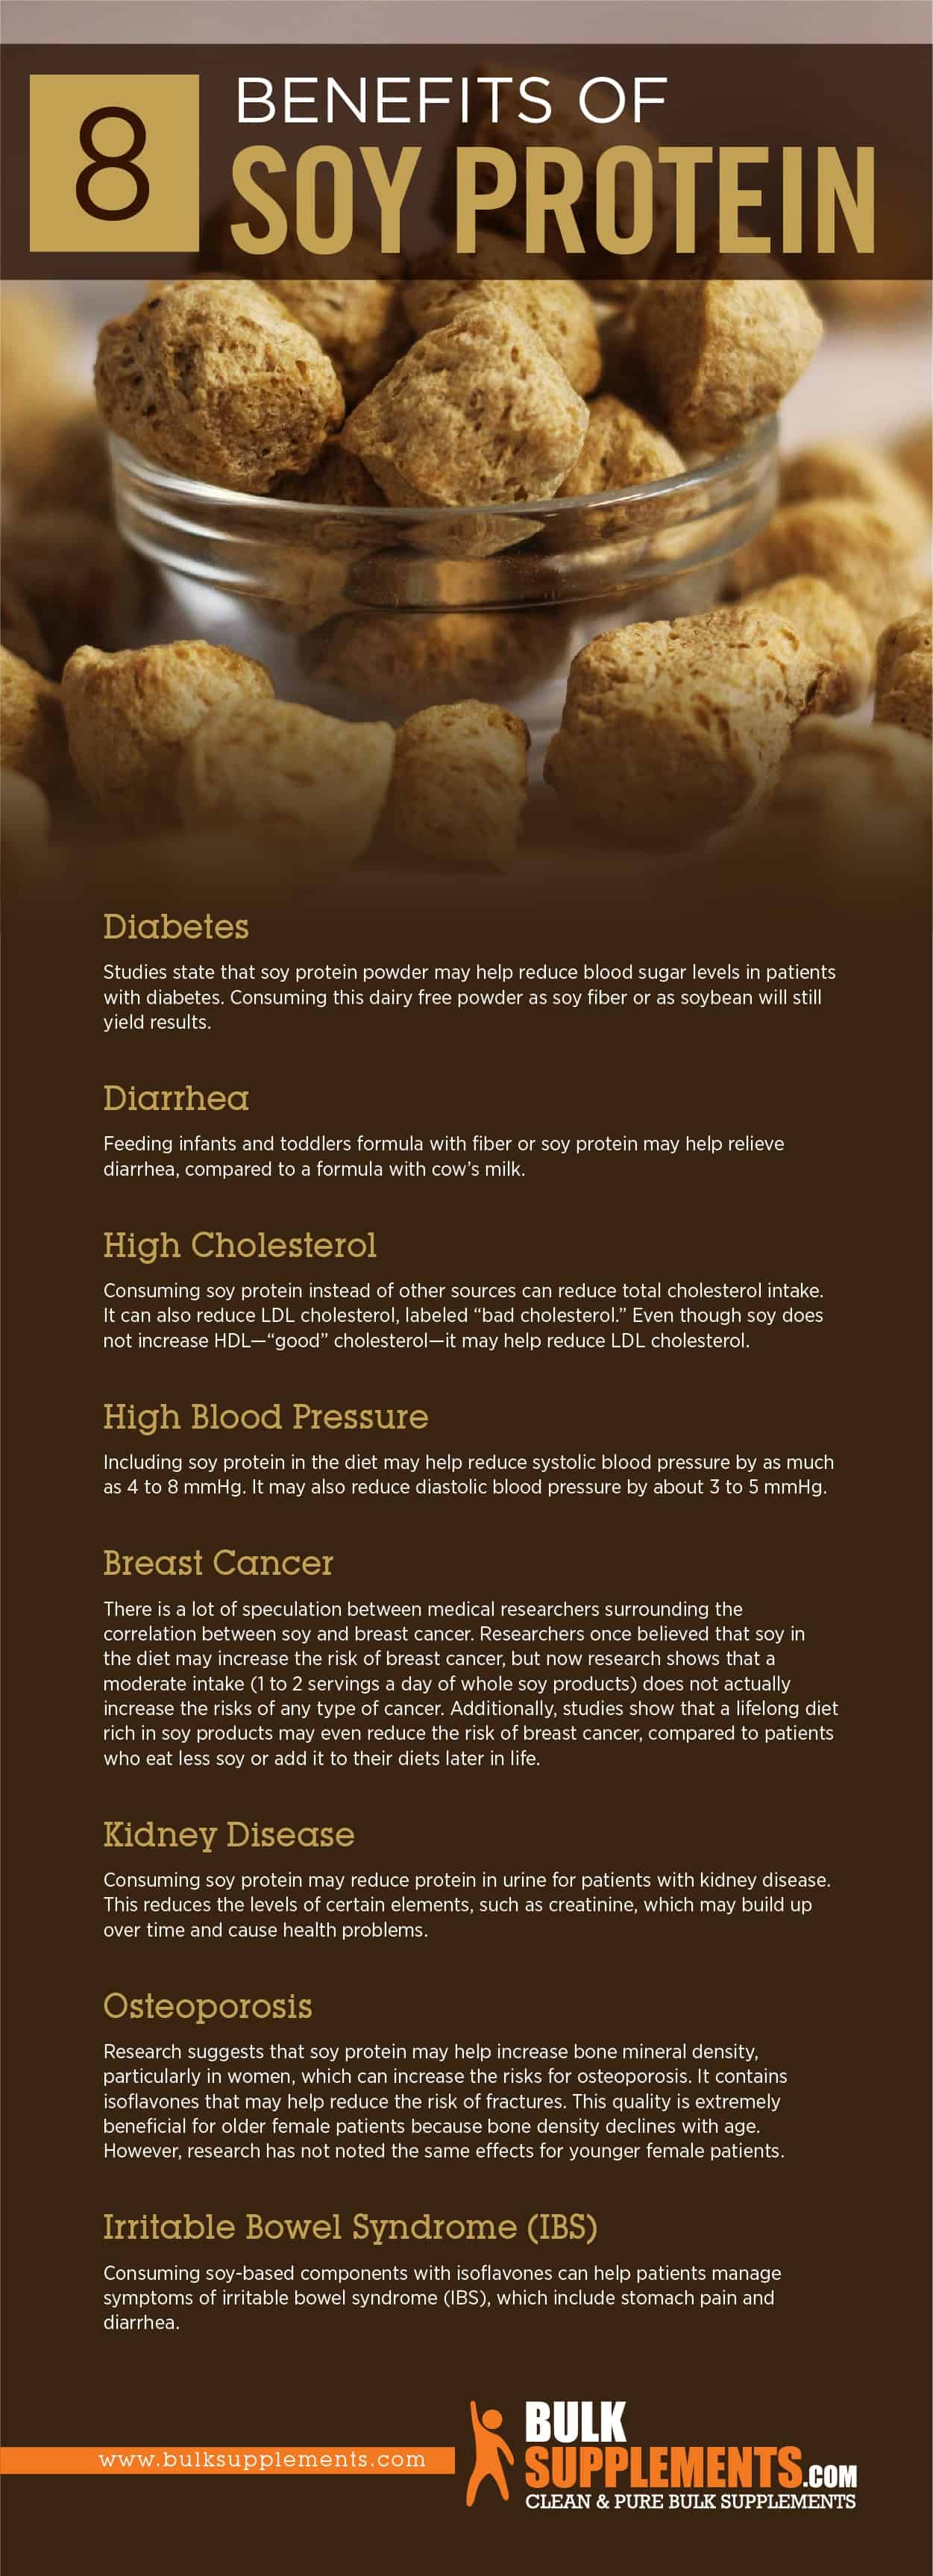 Benefits of Soy Protein